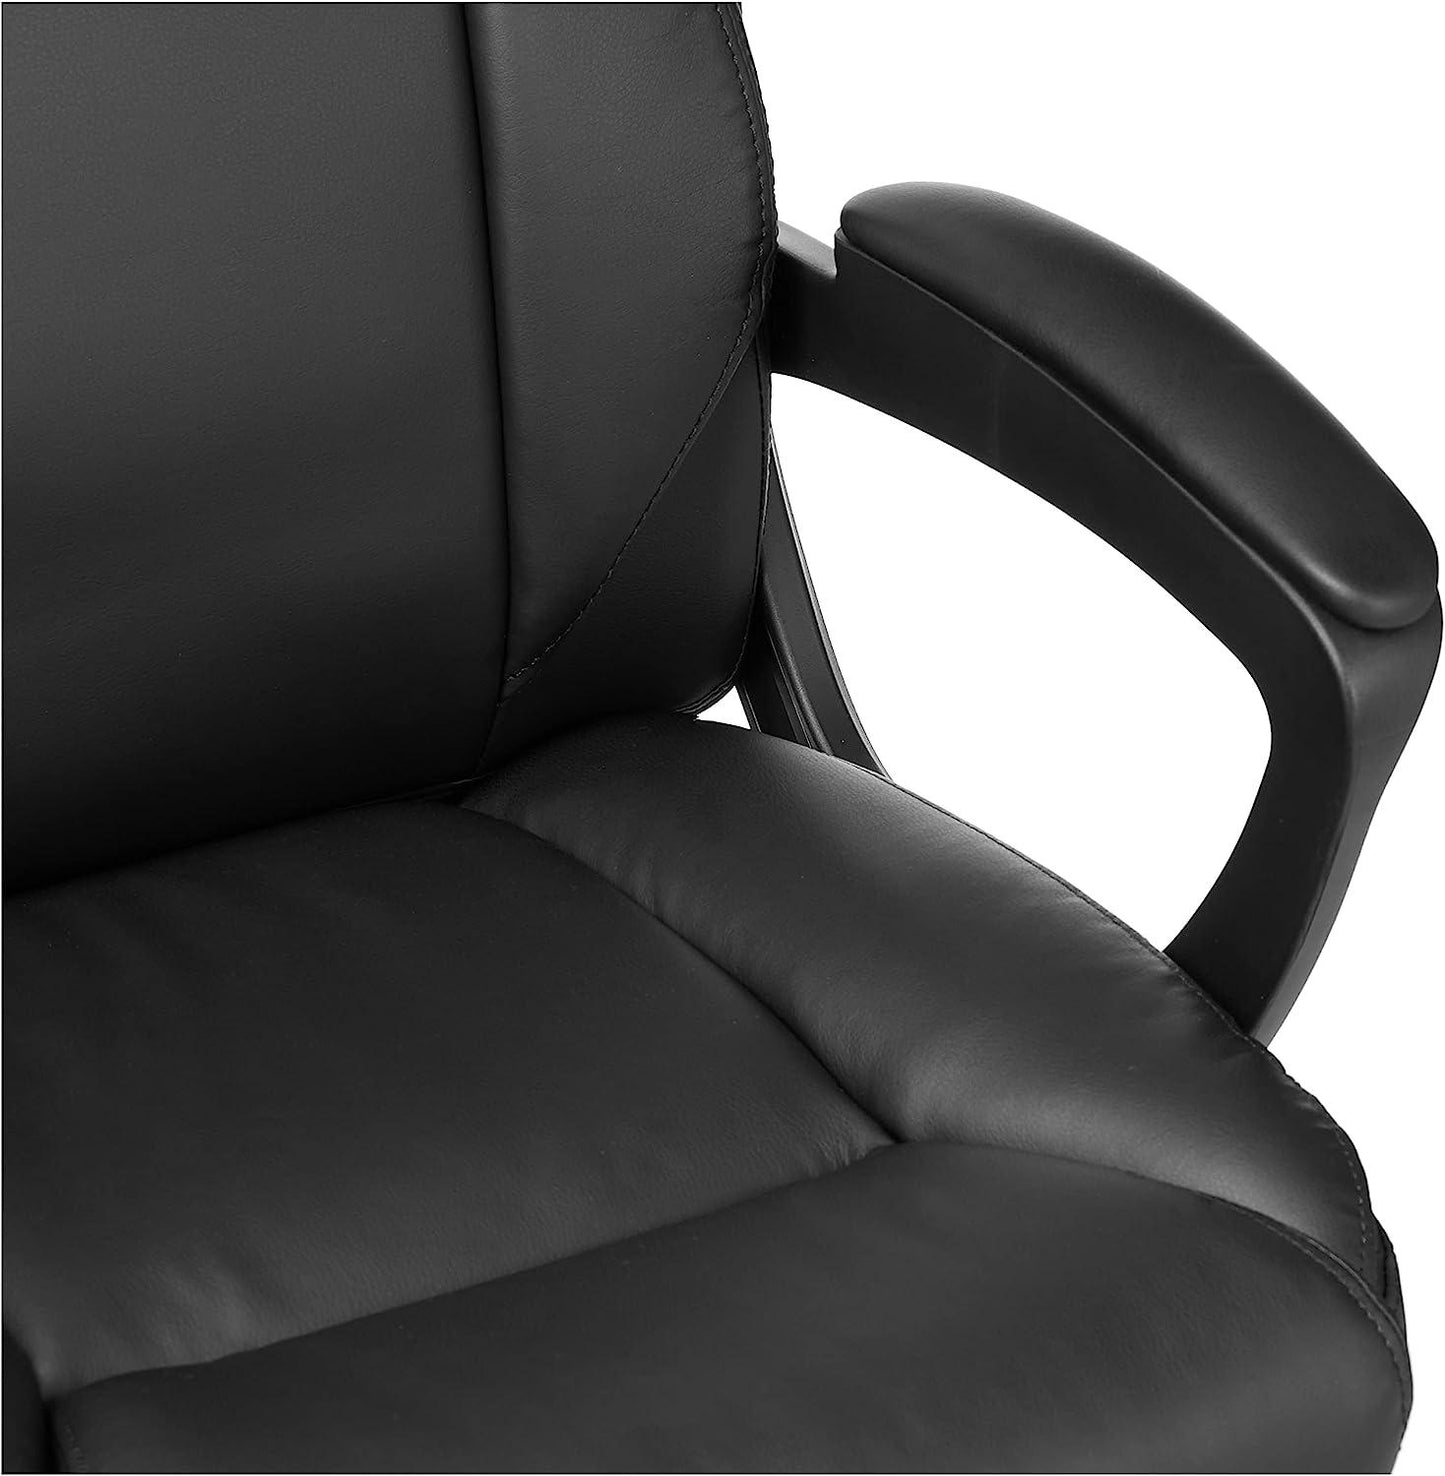 Basics Classic Puresoft PU Padded Mid-Back Office Computer Desk Chair with Armrest, 25.75 D x 24.25 W x 42.25 H, Black